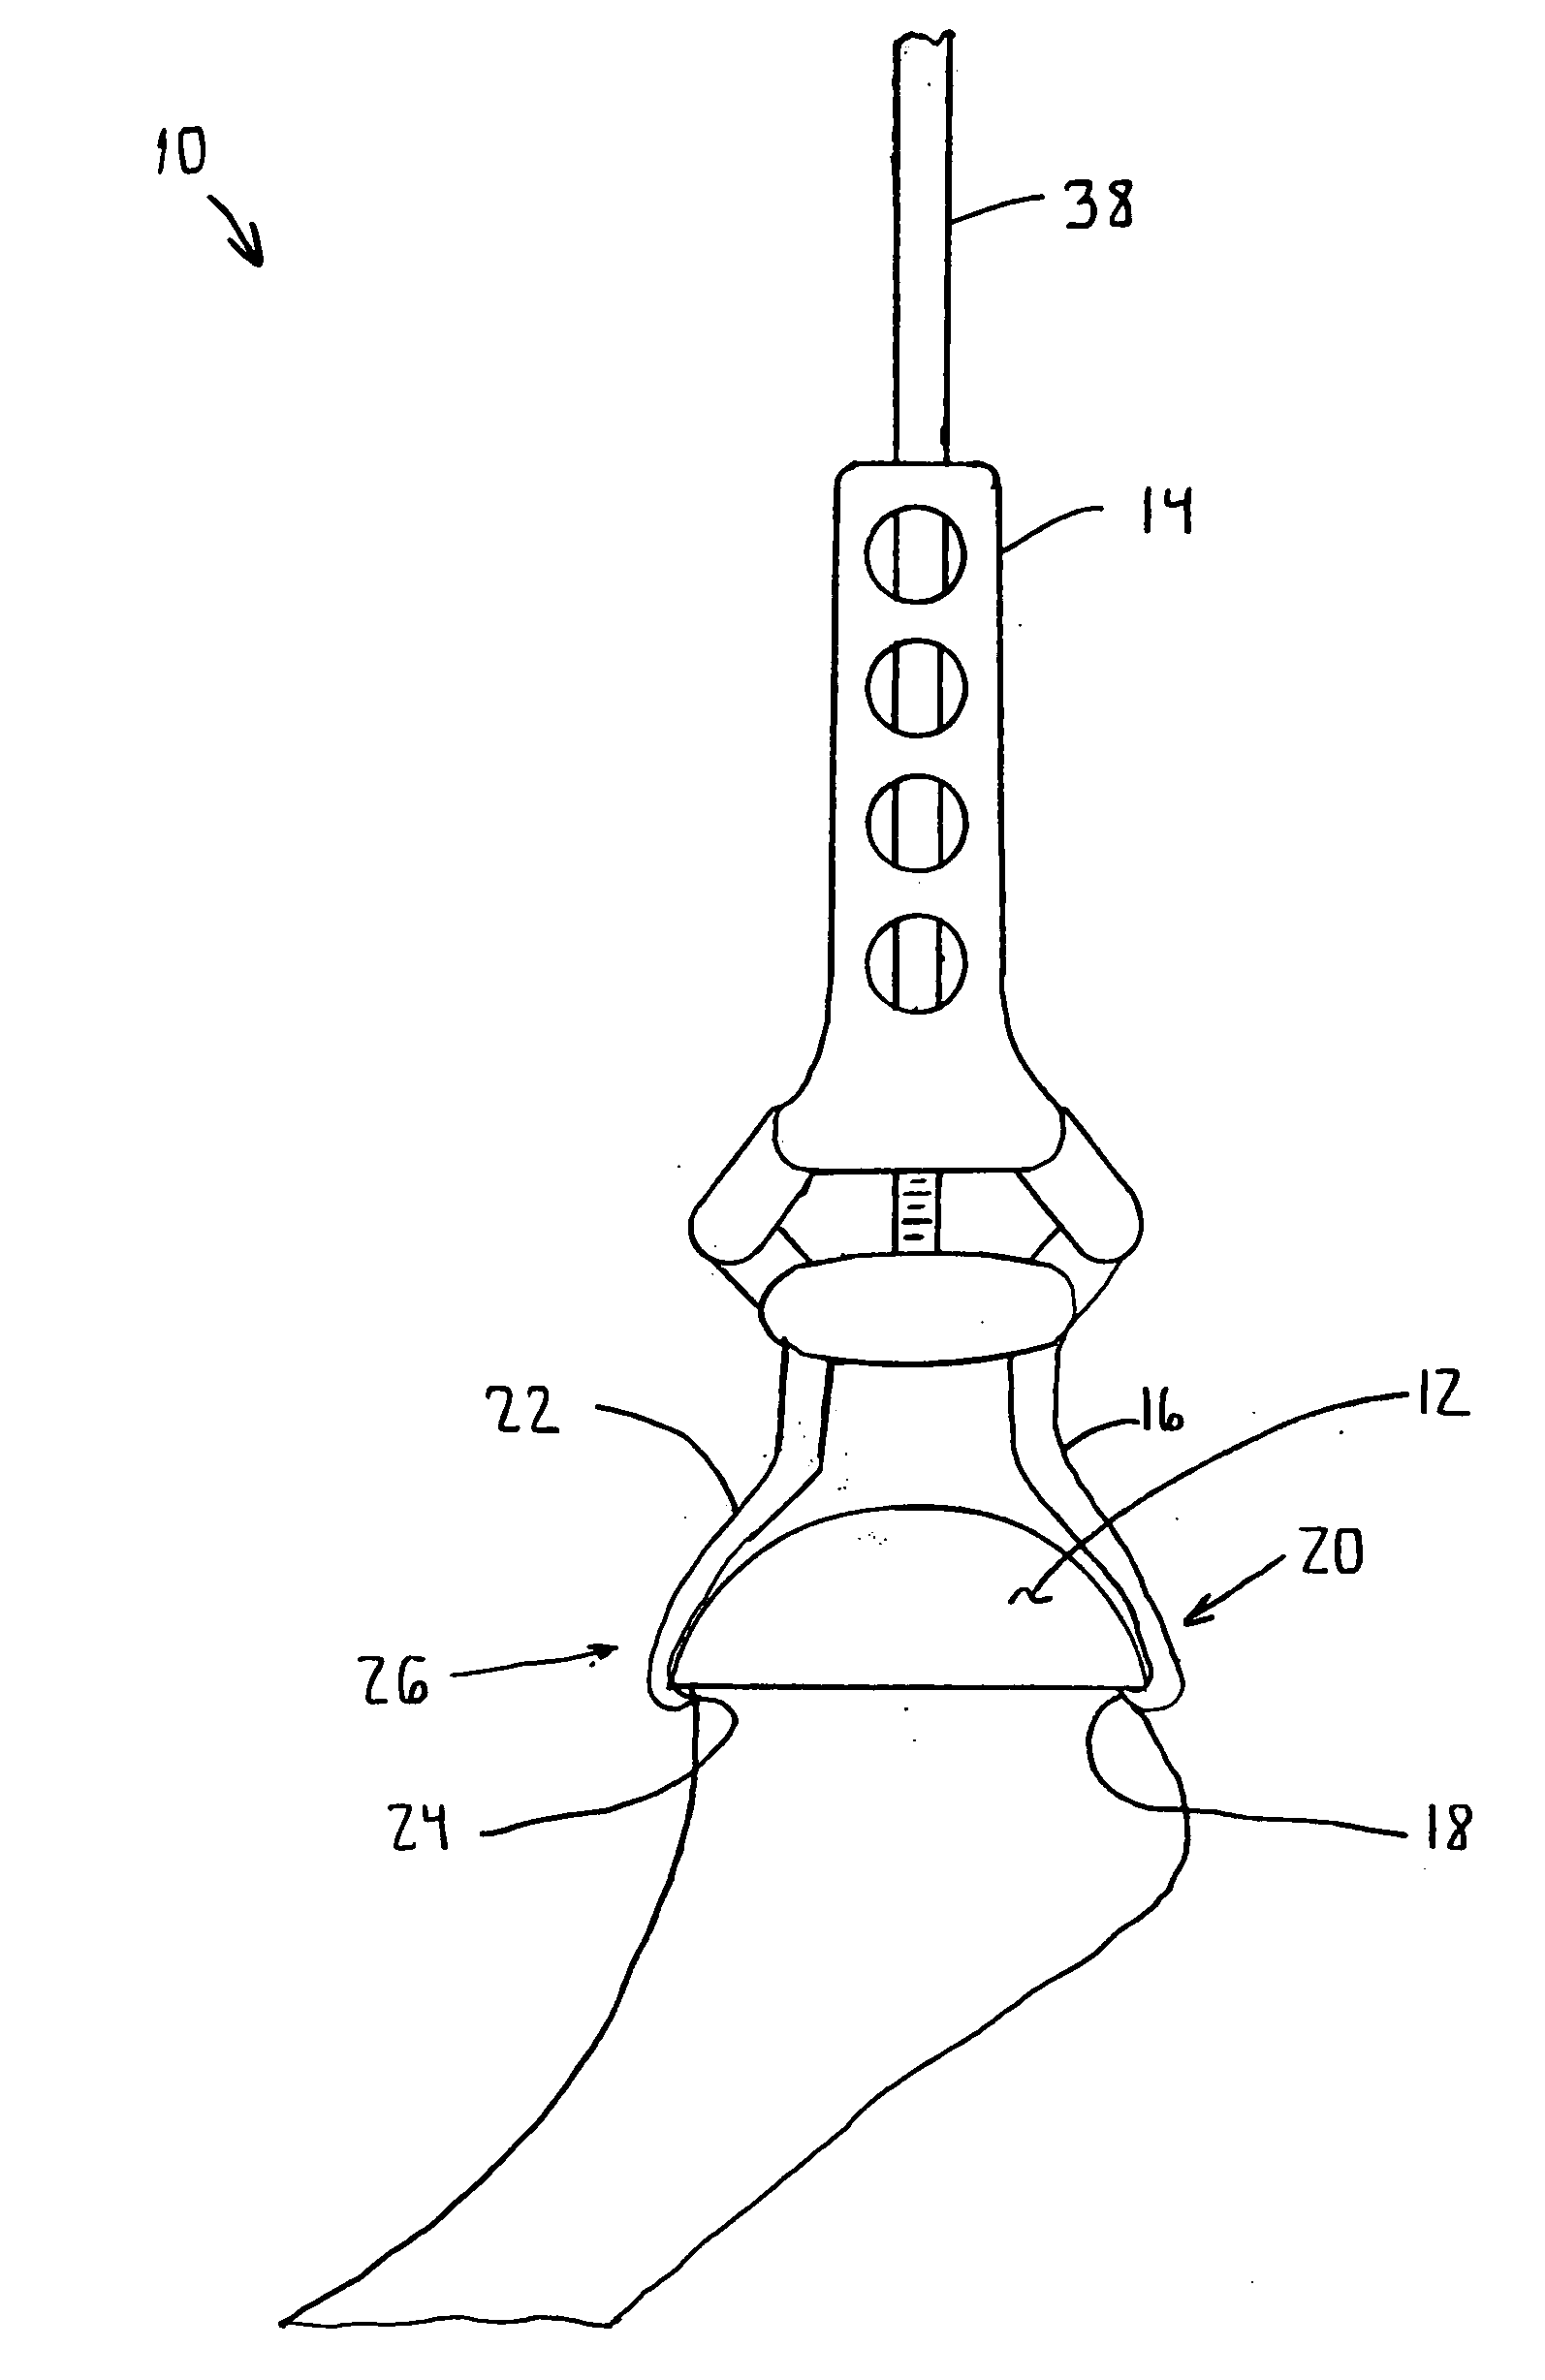 Surface replacement extractor device and associated method